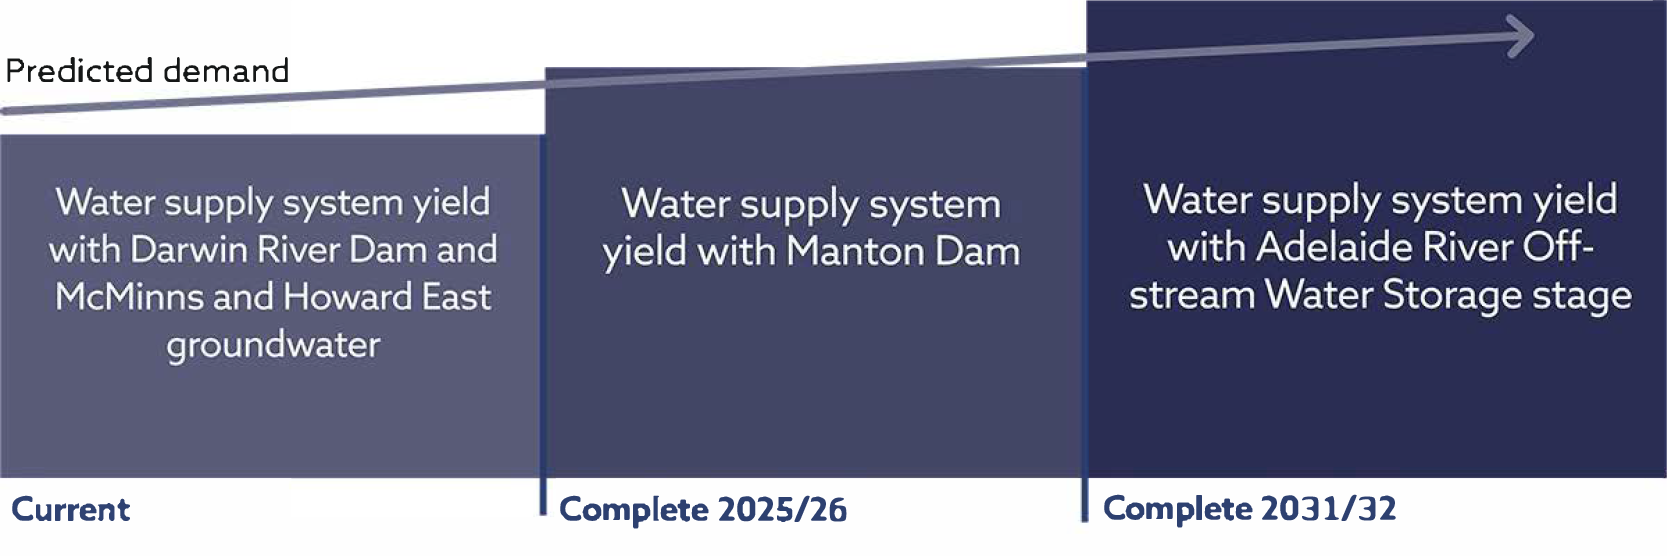 A graph showing predicted increase demand for water in Darwin over the next 50 years.  Current water supply system yield with the Darwin River and Mcminns and Howard East ground water. An increase in demand predicted water supply system yield with Manton Dam to be completed 2024-25.  An increase in predicted water supply system yield with Adelaide River Off Stream water storage to be completed in 2028-29.